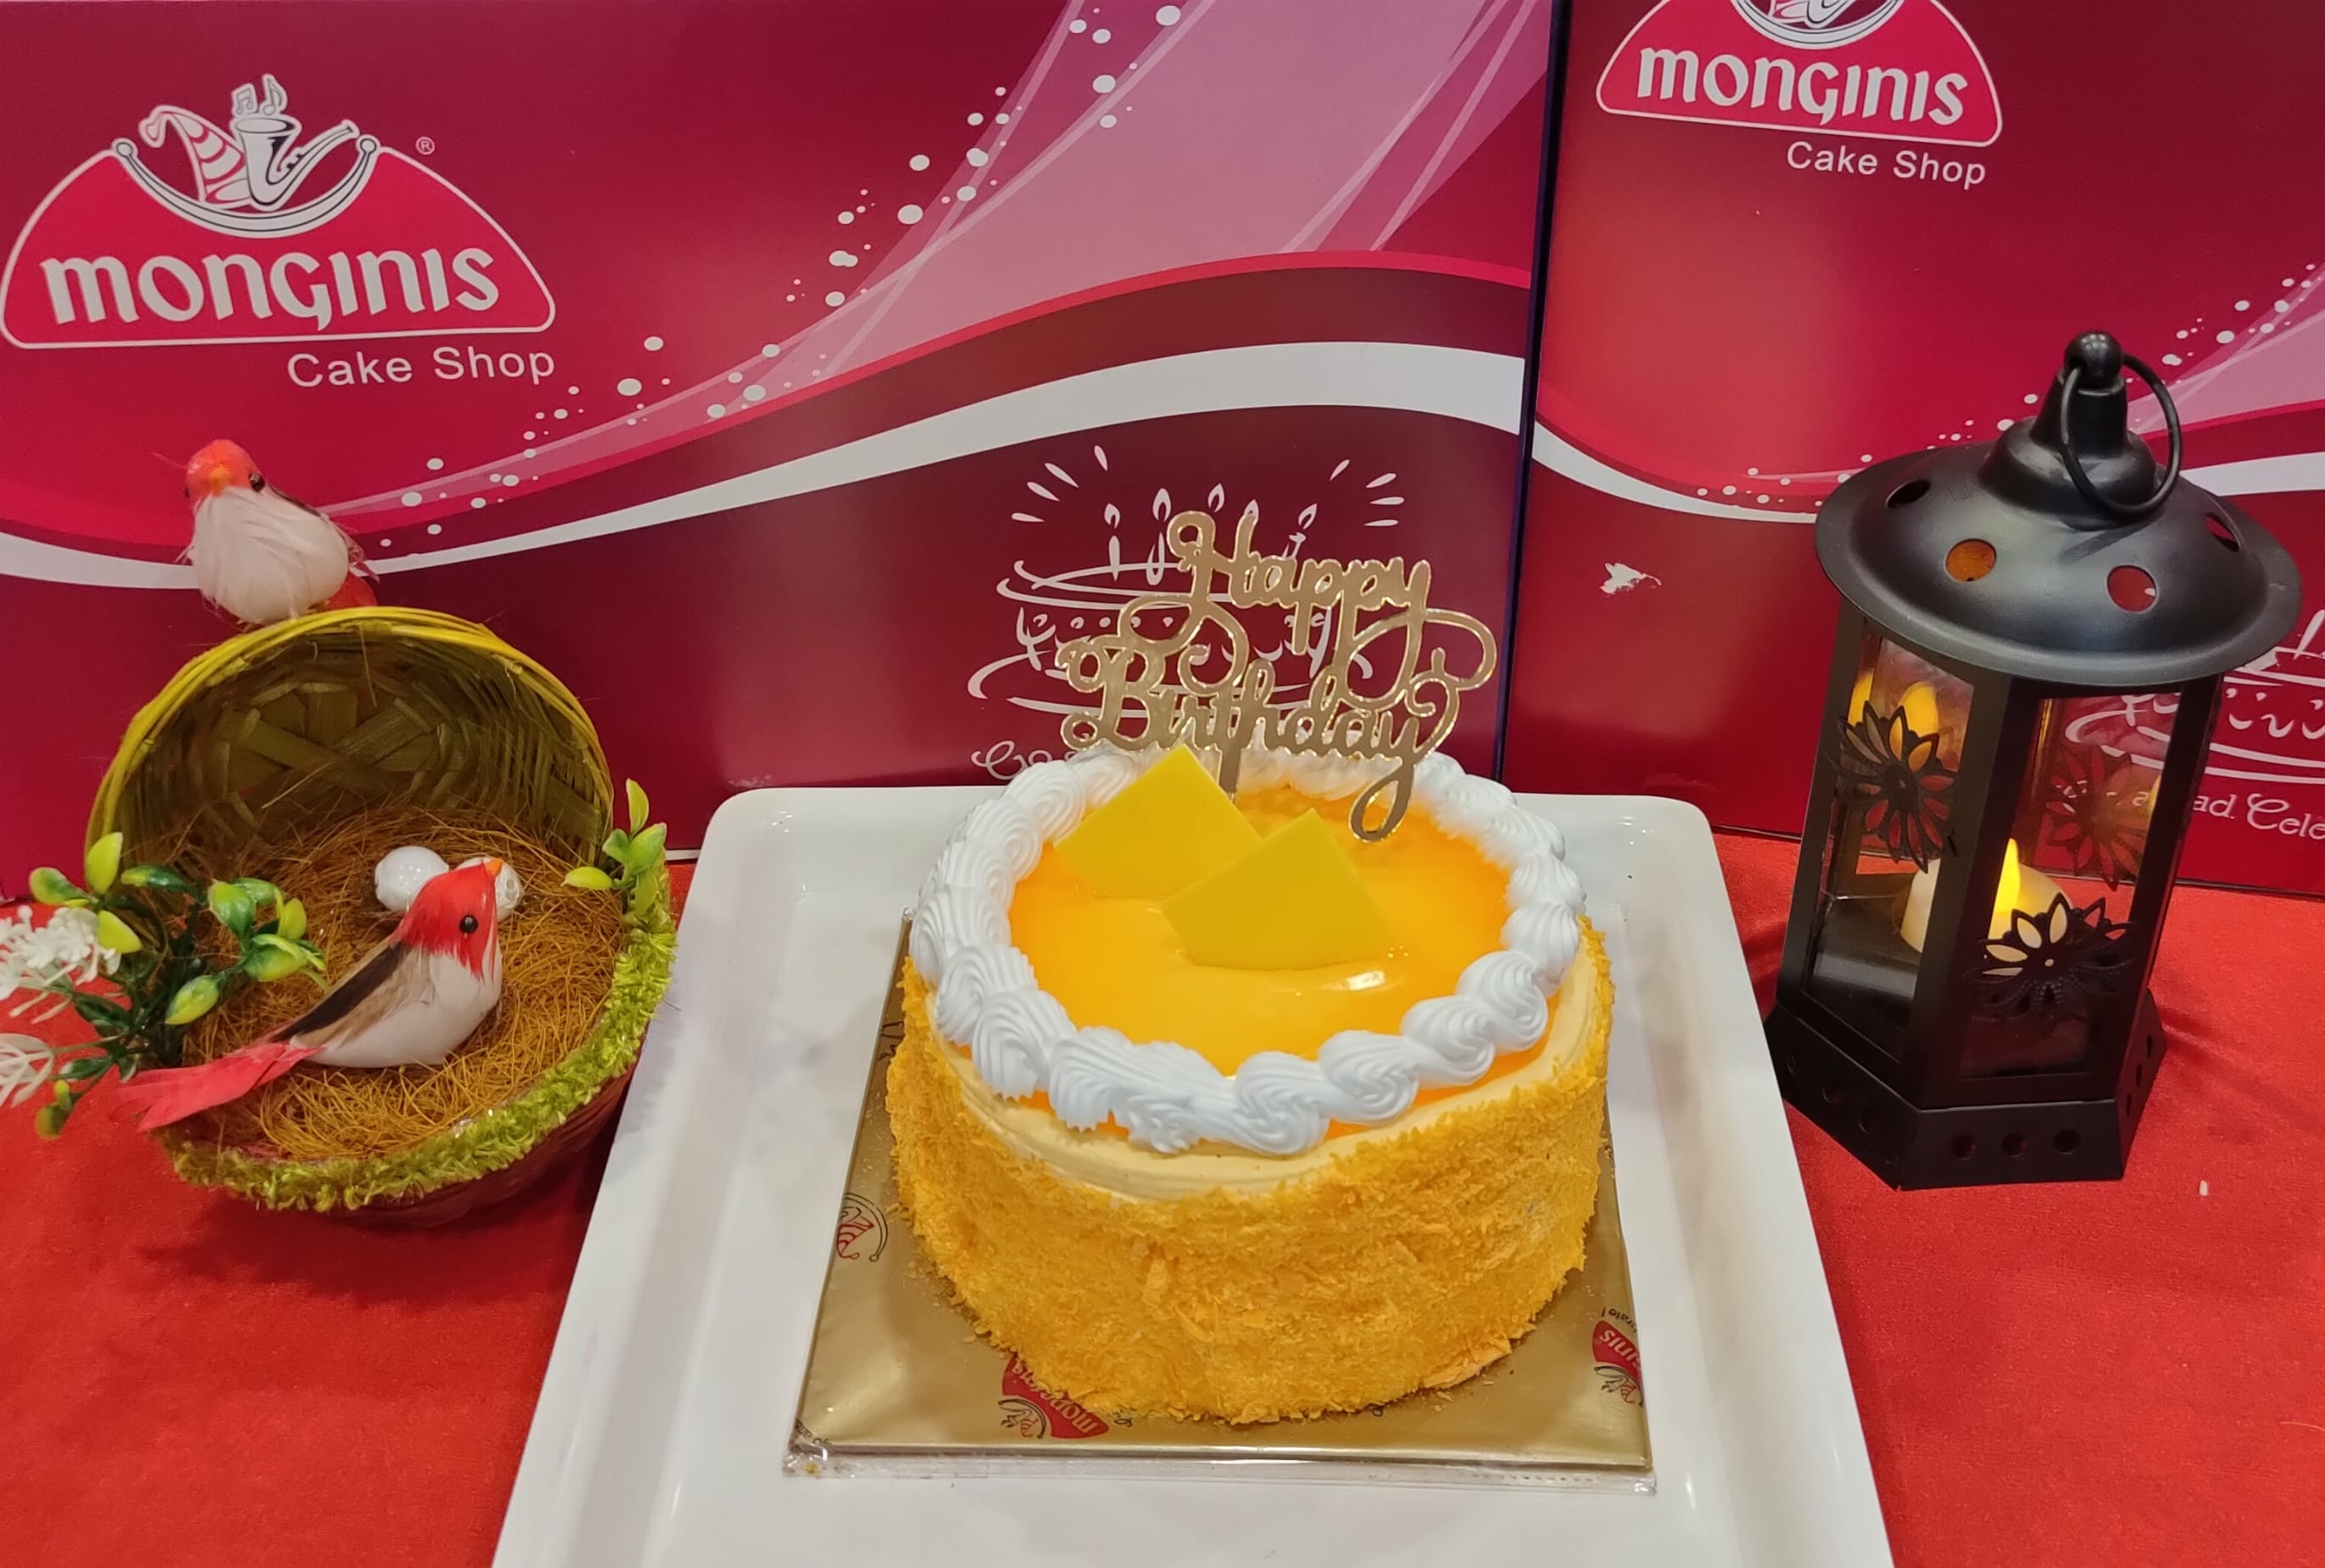 Monginis Cake Shop - Thane - This is a 3-tier Fruit Wedding cake designed  exclusively for occasions like weddings or anniversaries. It contains  flamboyant decoration of handcrafted marzipan fruits and flowers, dark